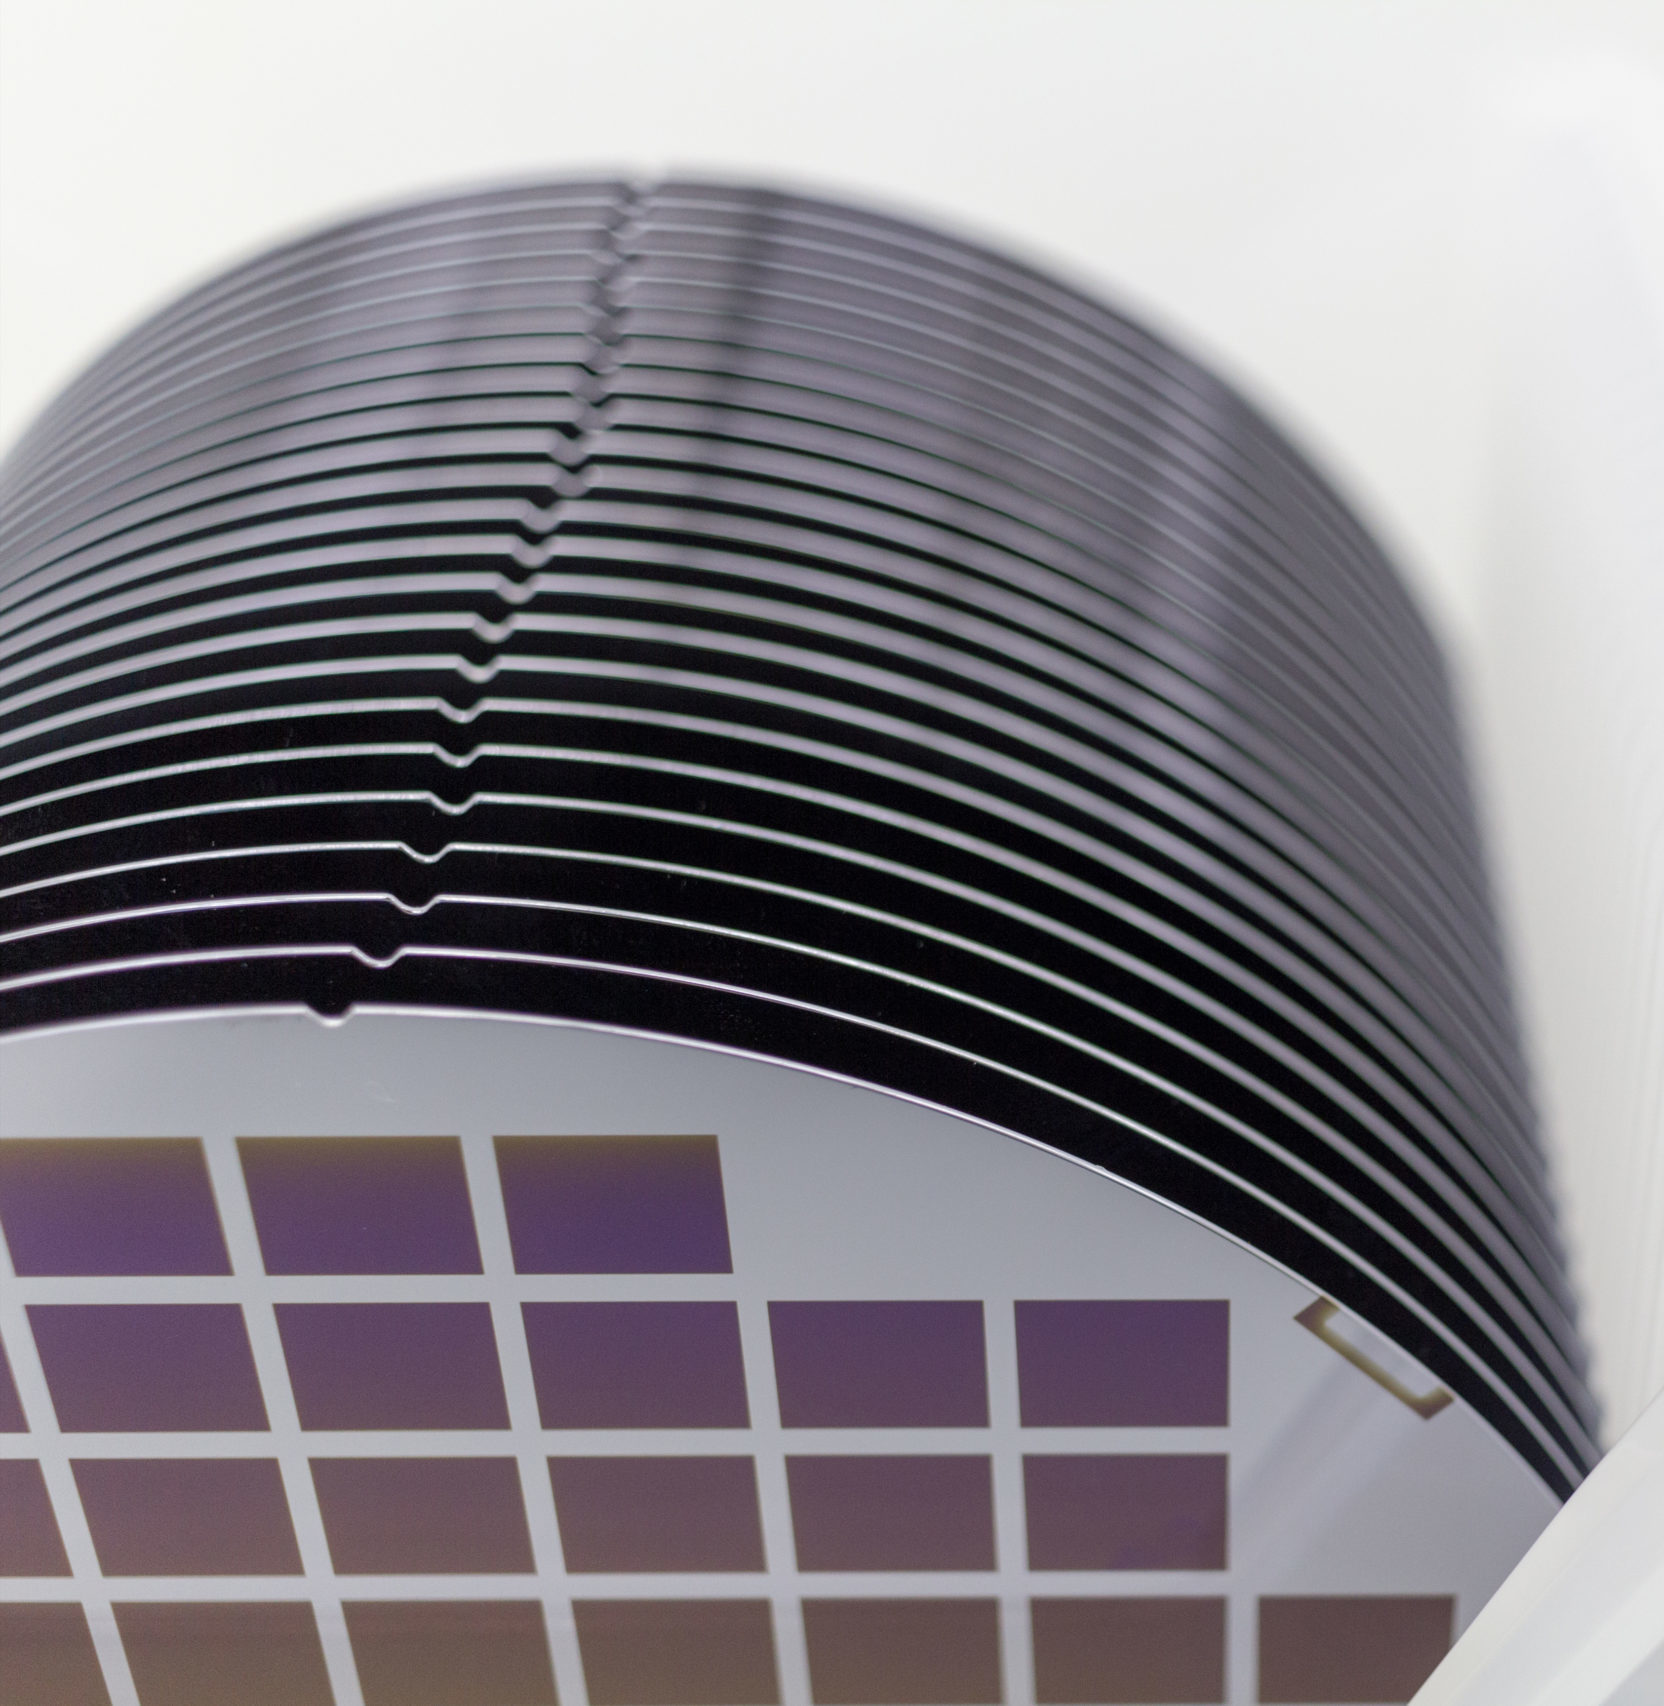 Silicon Wafers in white plastic holder box on table ,background is white color- A wafer is a thin slice of semiconductor material, such as a crystalline silicon, used in electronics for the fabrication of integrated circuits.Wafers with microchips.Rainbow on silicon wafers.Color silicon wafers with glare.